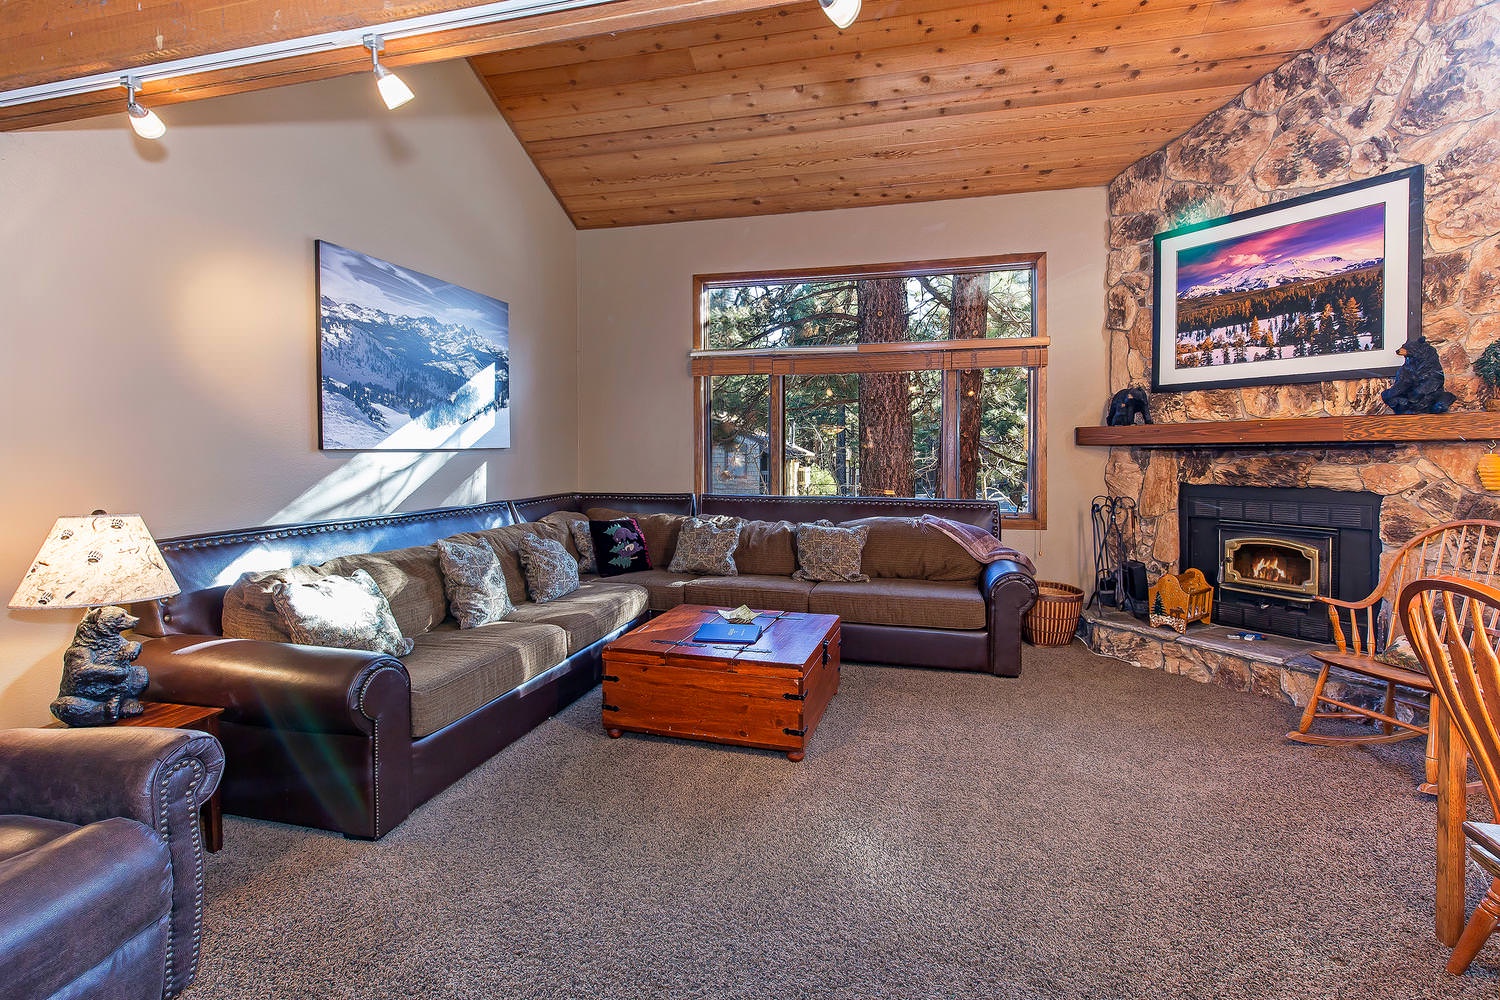 Living room w/ flat screen TV, BluRay DVD player, wood burning fireplace and board games